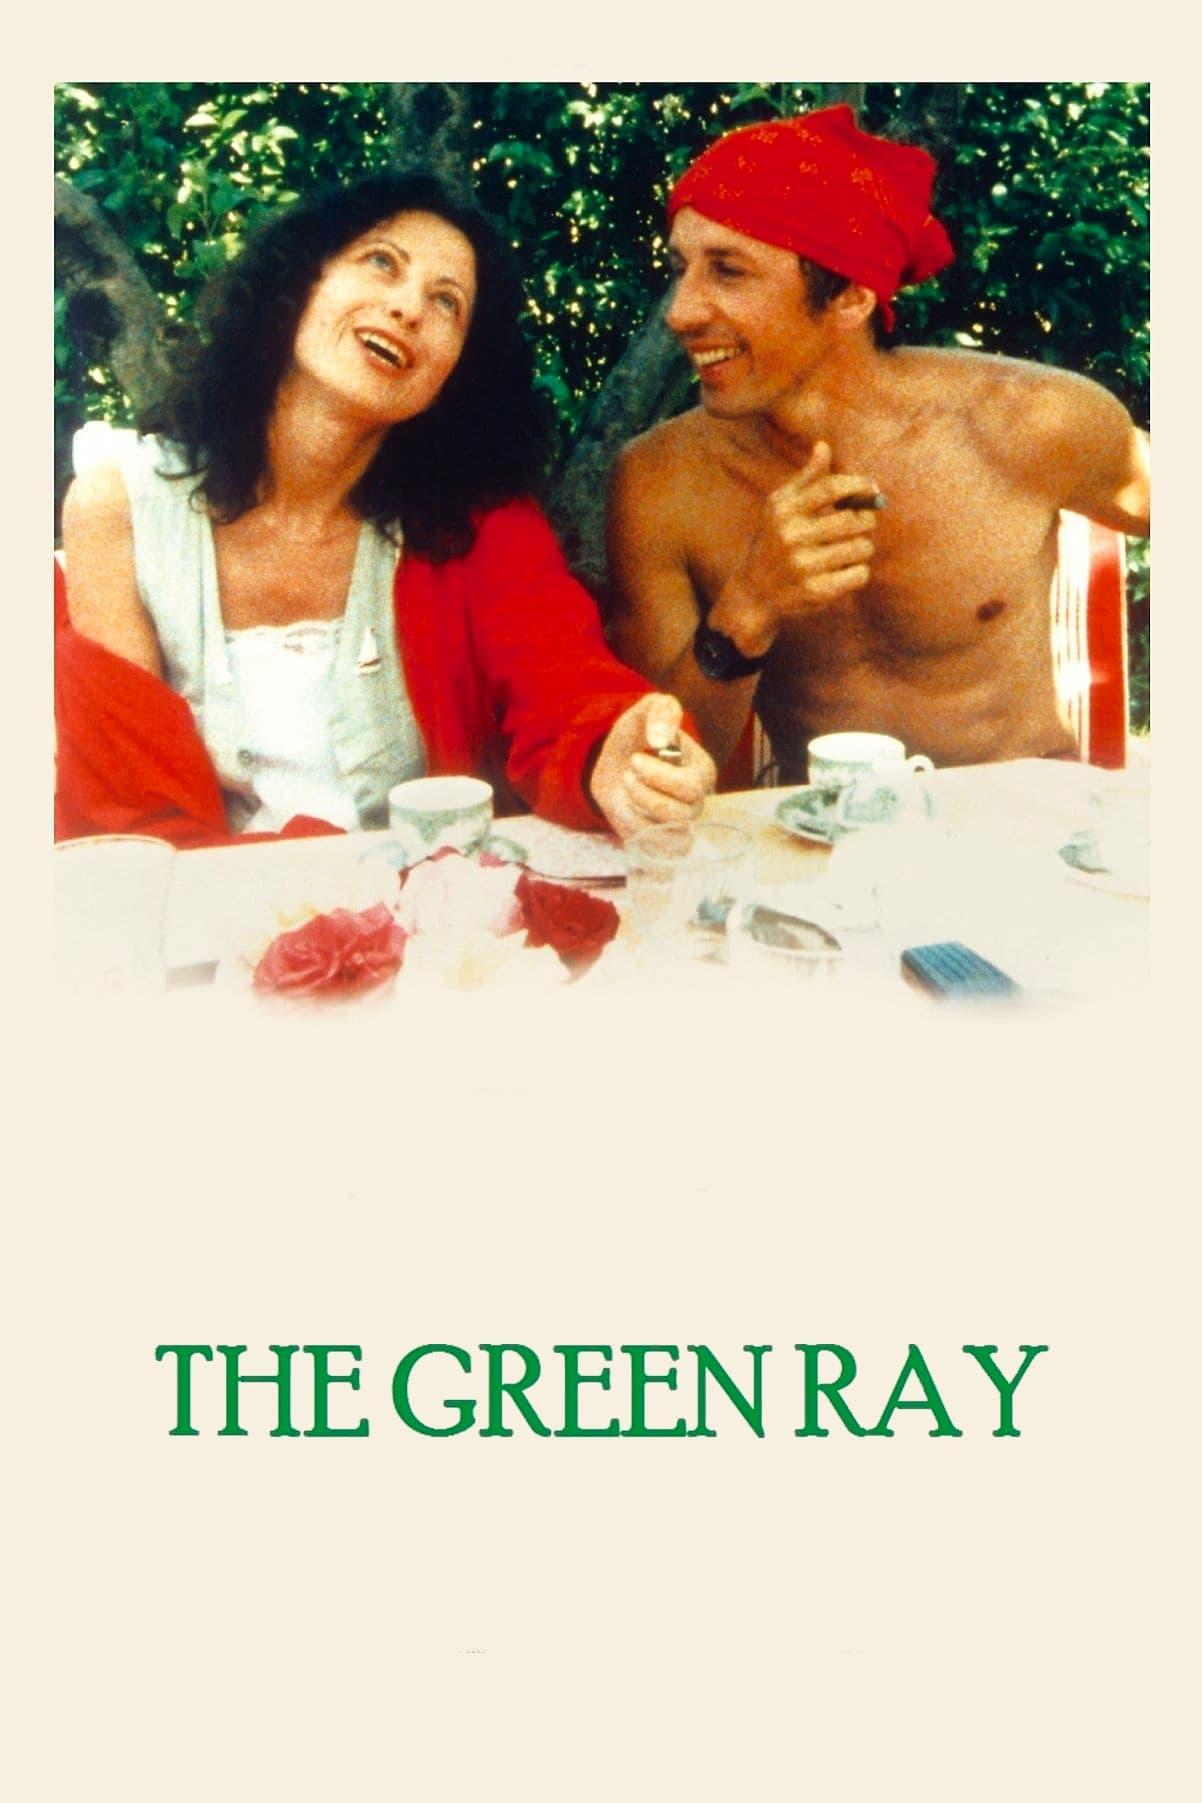 The Green Ray poster